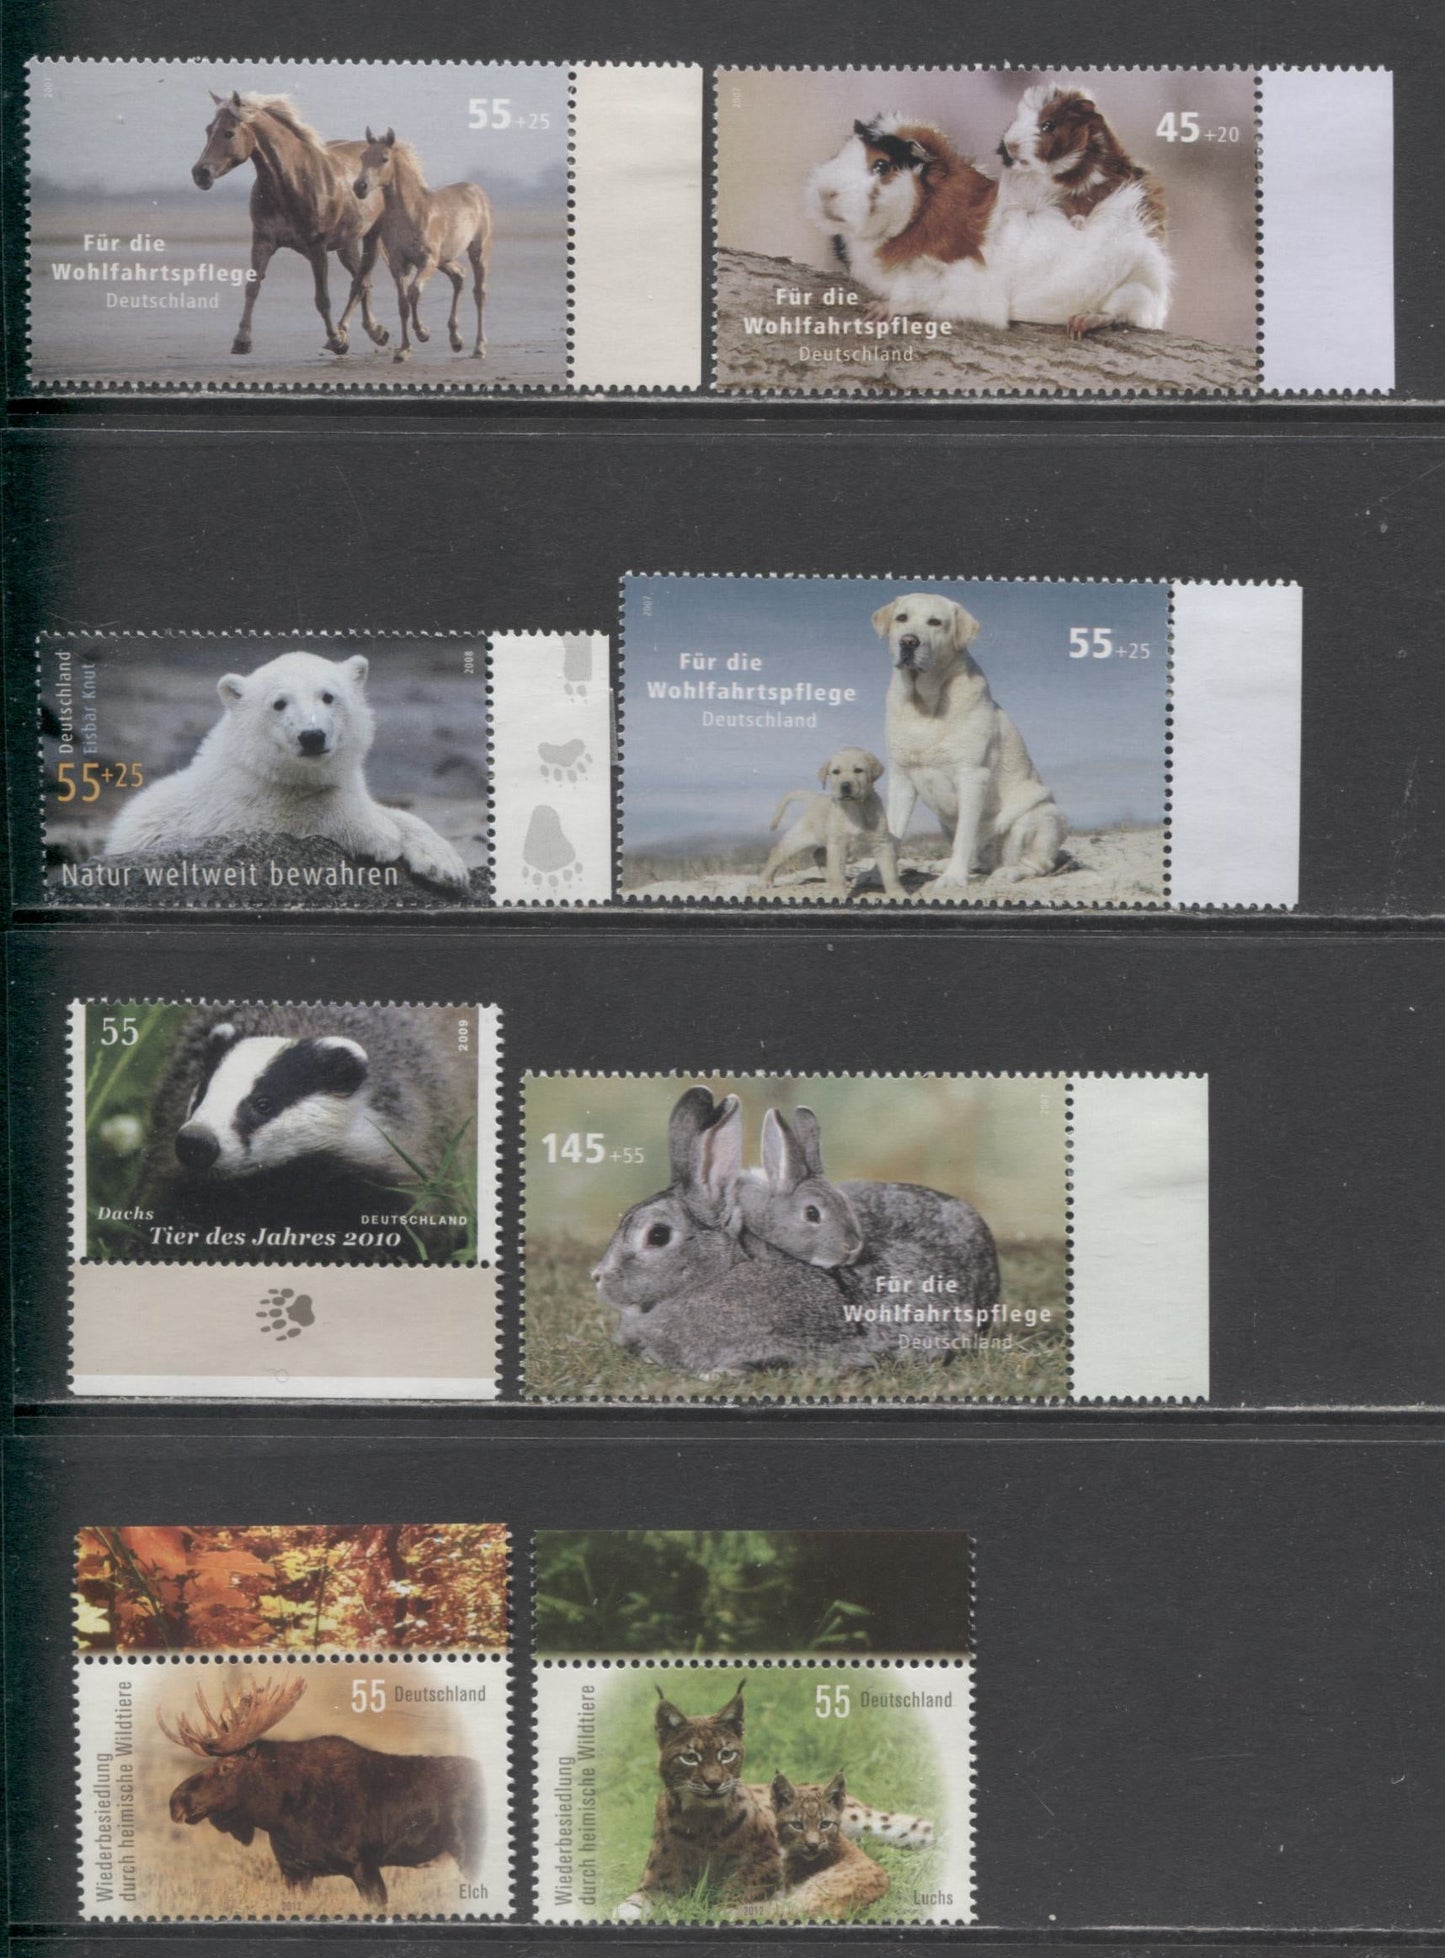 Lot 5 Germany SC#2553/B1001 2007-2012 Adult/Juvenile Animals, Polar Bears, Badger & Endangered Species, 9 VFOG Singles, Click on Listing to See ALL Pictures, 2017 Scott Cat. $17.65